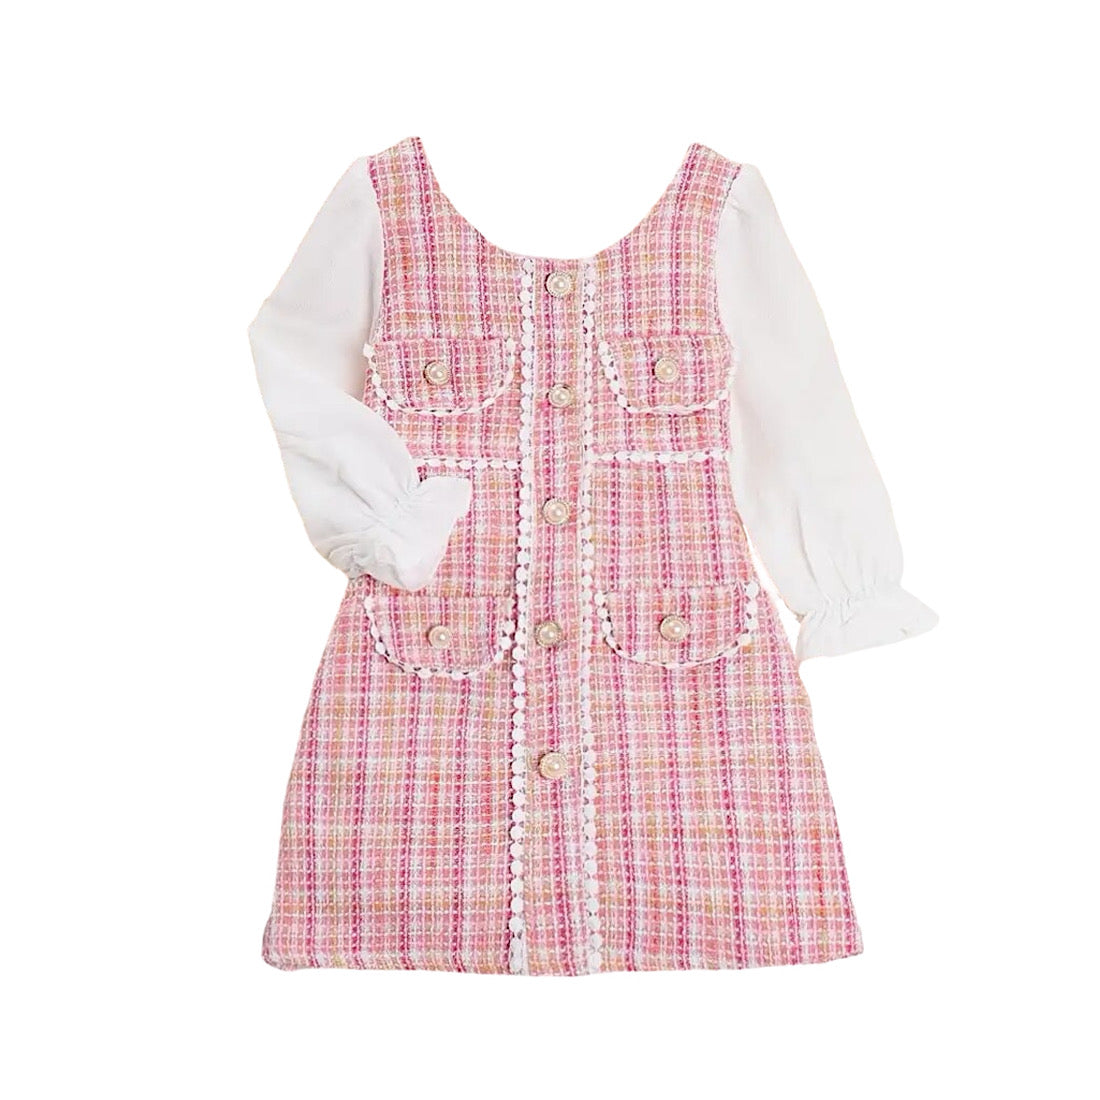 Toddler Girls Pink Plaid Dress Puff Long Sleeve Pearl Spring Dress, Color